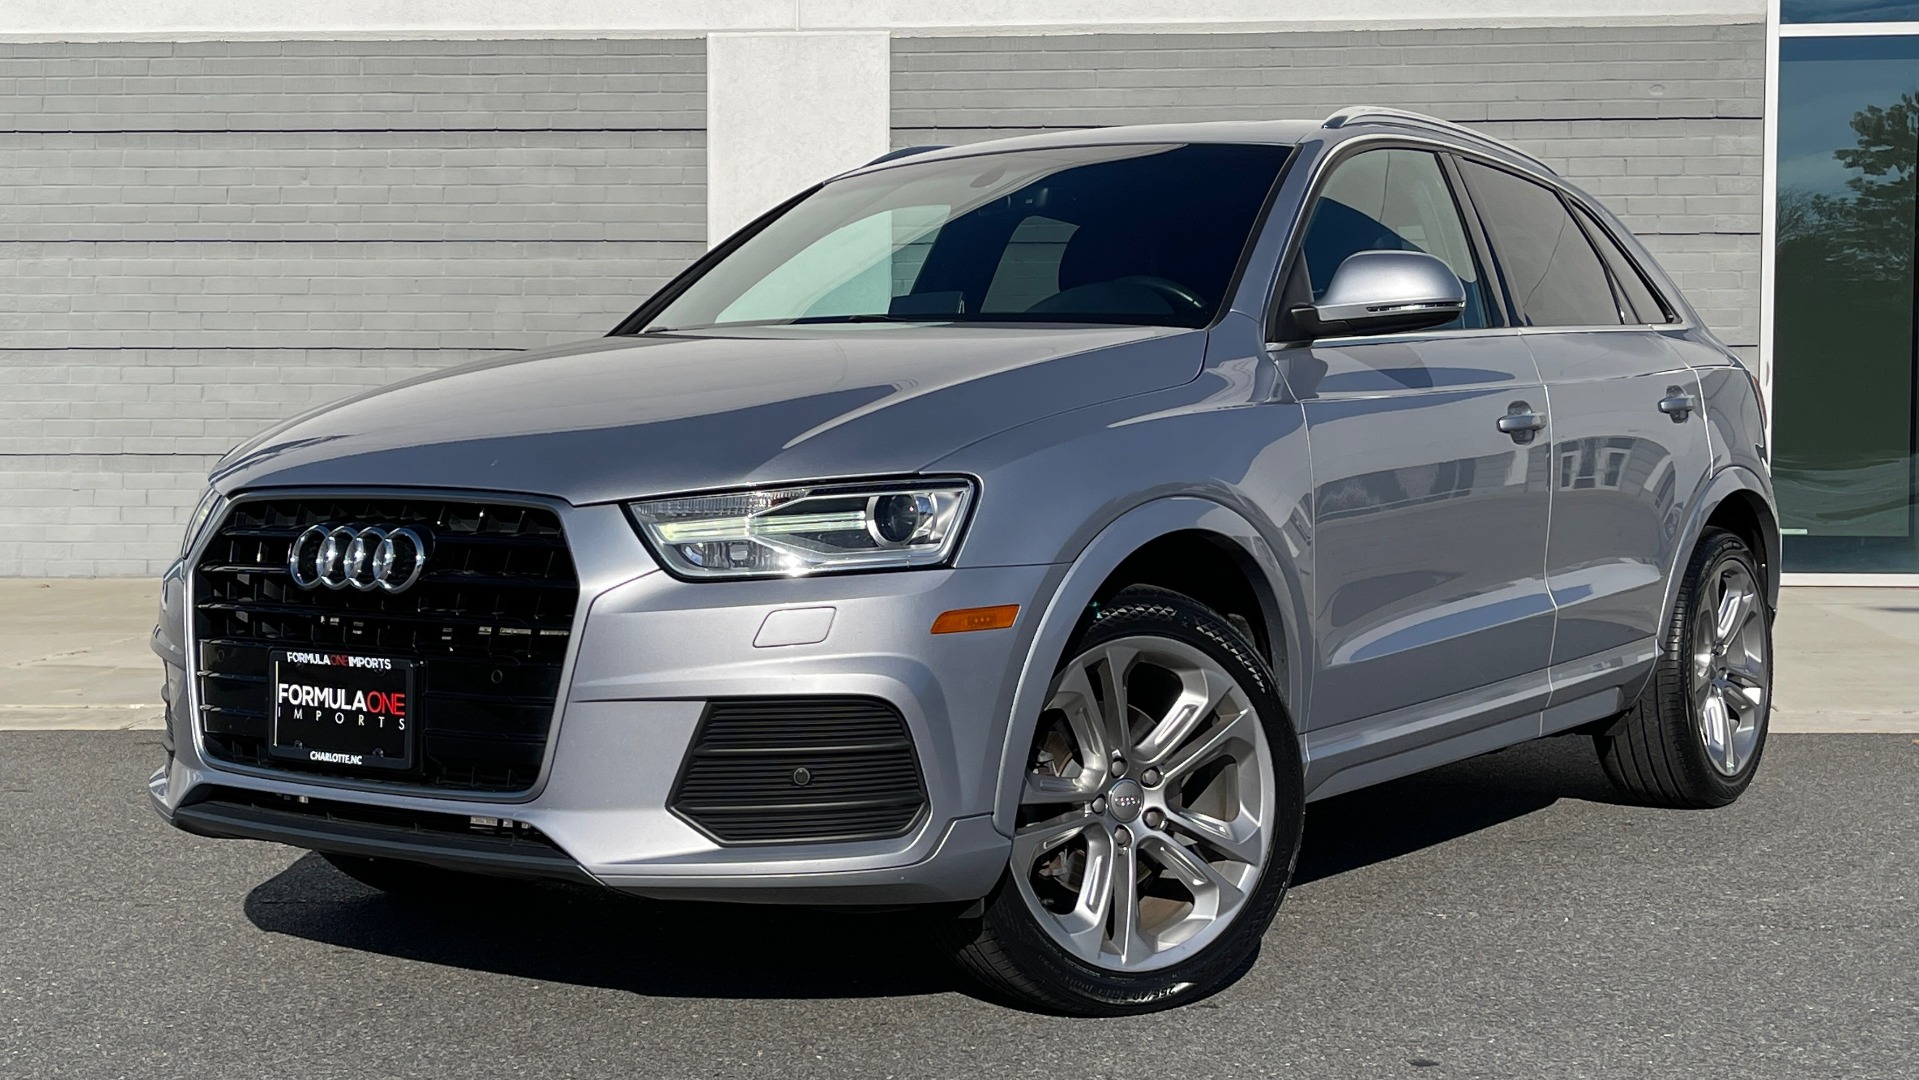 Used 2016 Audi Q3 PREMIUM PLUS 2.0L / PANO-ROOF / HTD STS / 19IN WHEELS / REARVIEW for sale Sold at Formula Imports in Charlotte NC 28227 1